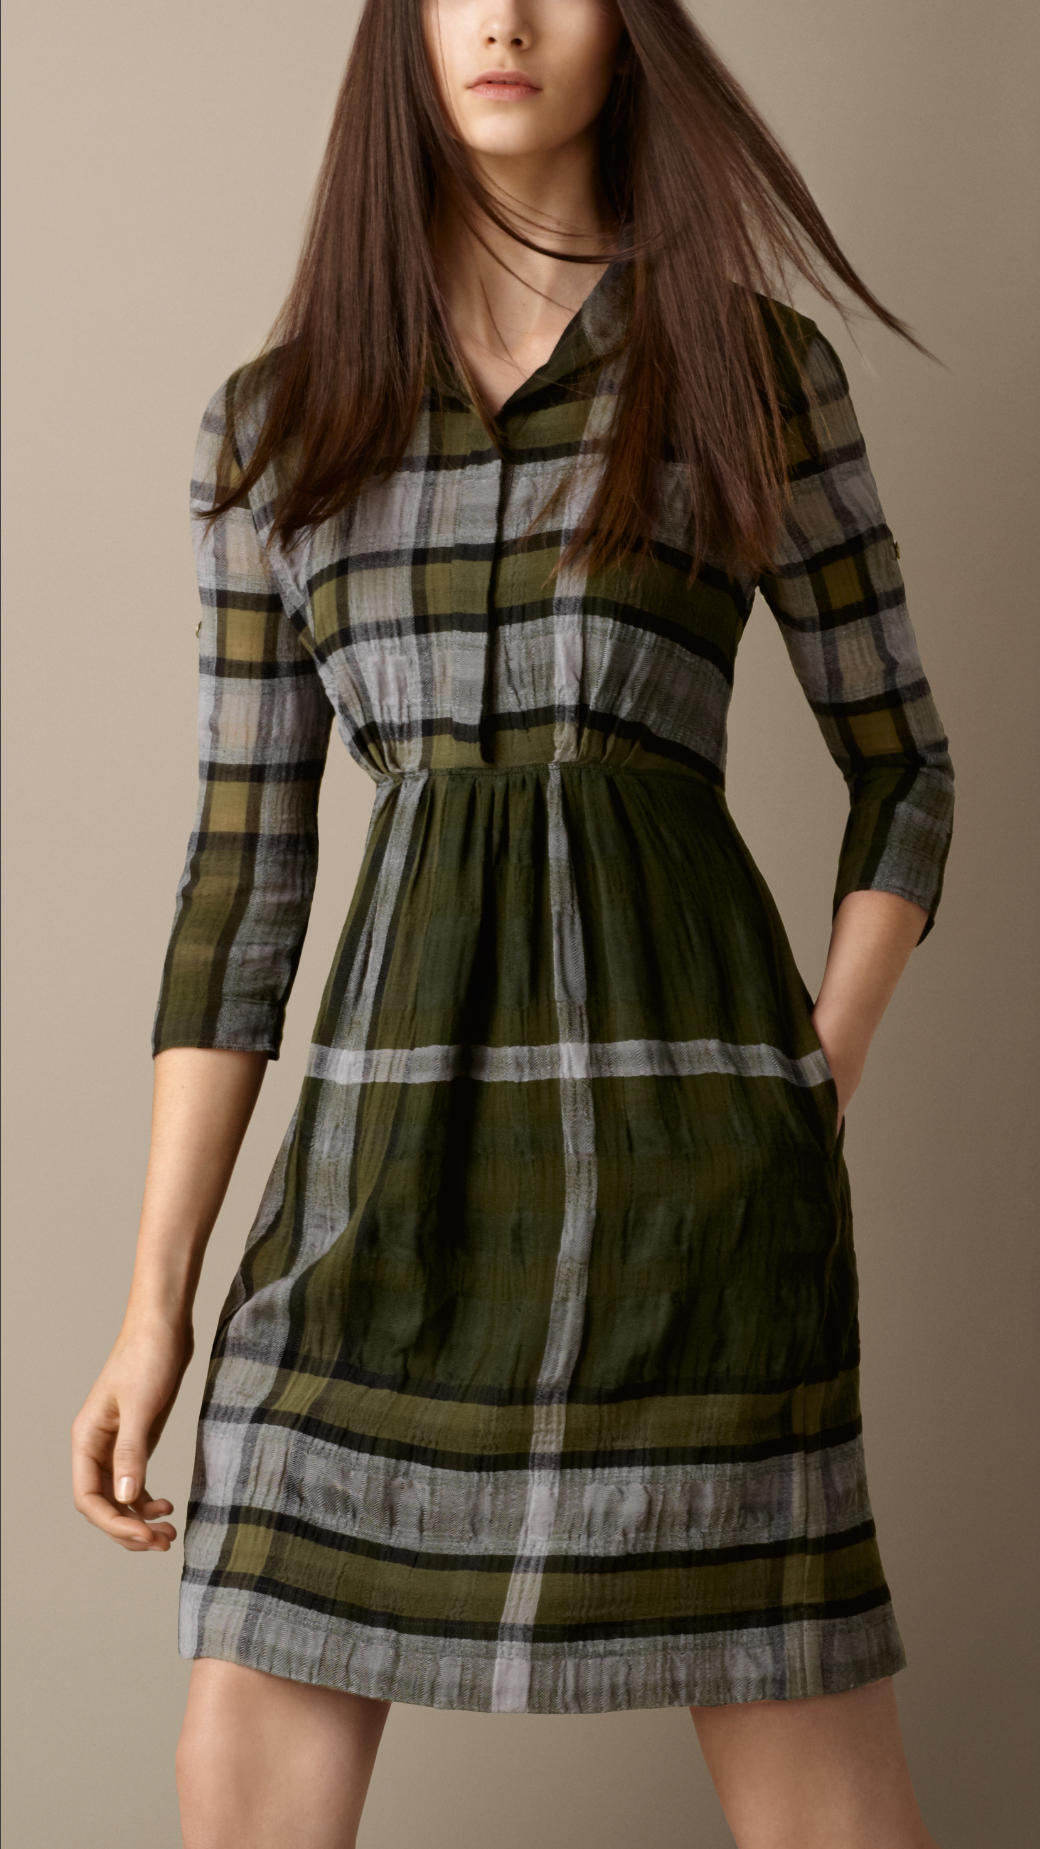  Burberry  Check Shirt  Dress  in Olive Green Lyst